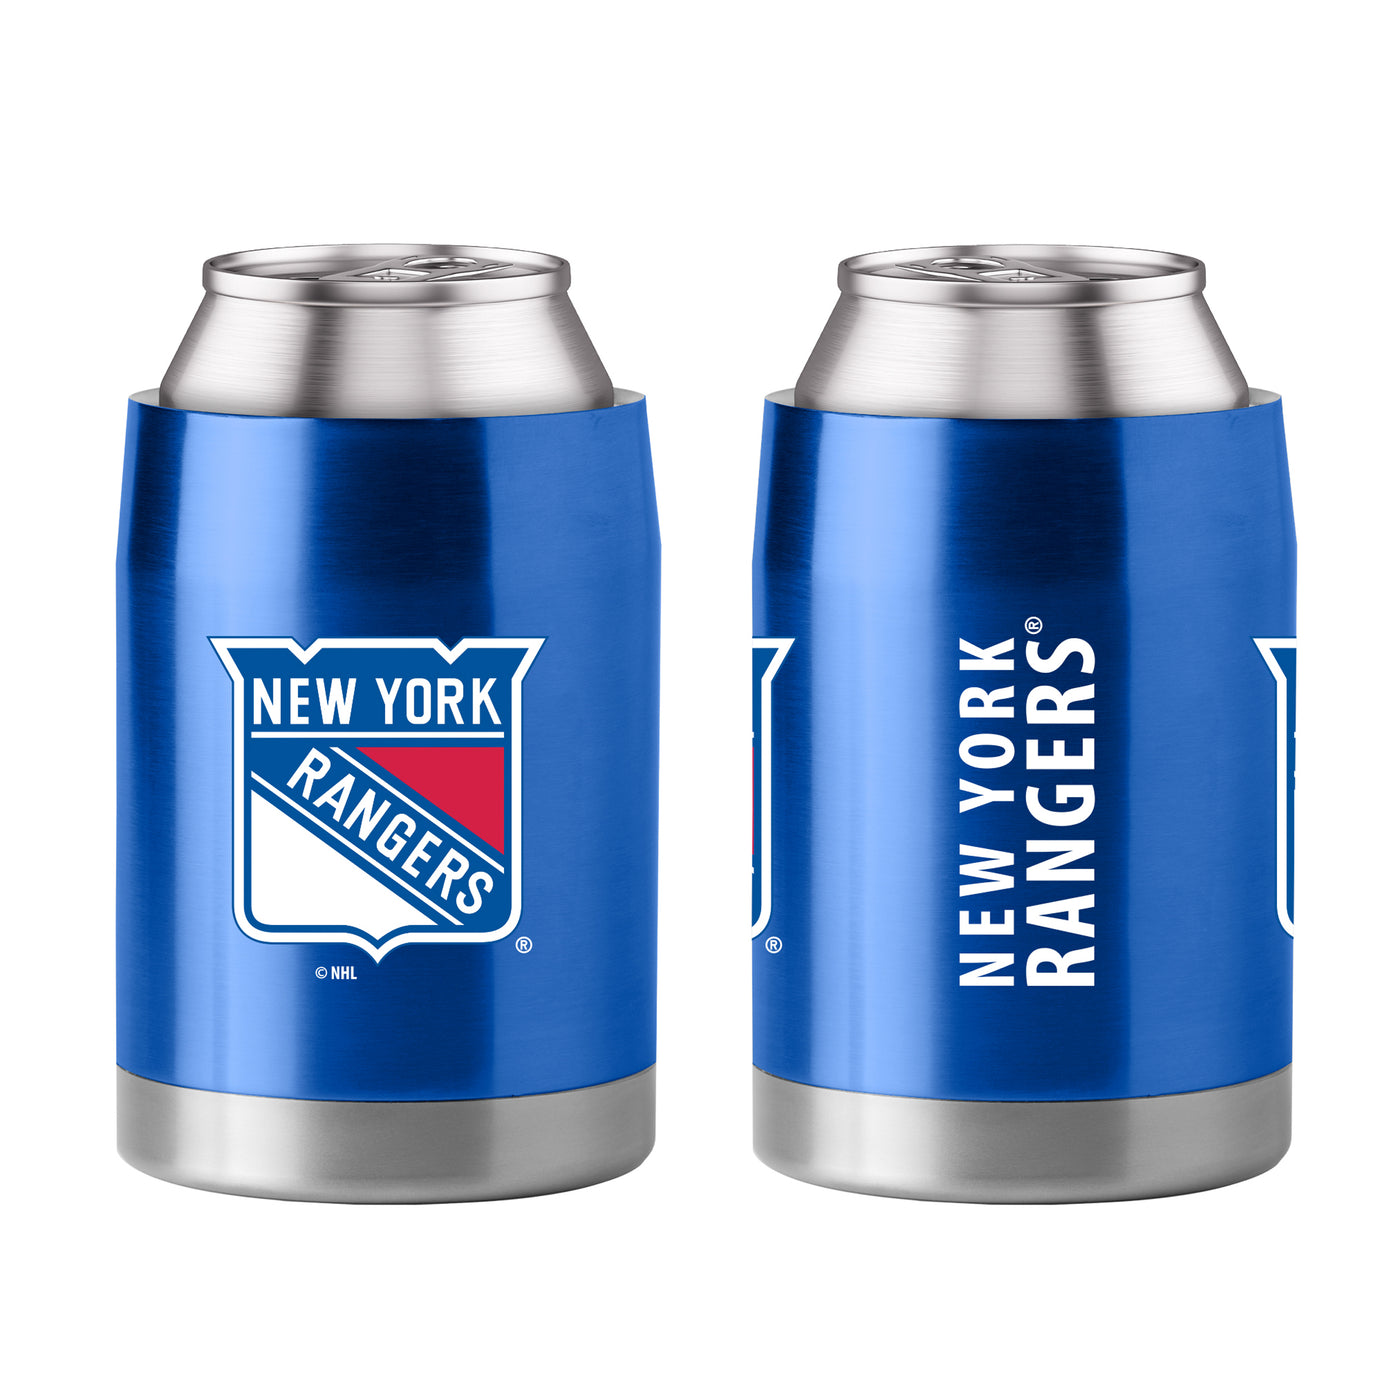 New York Rangers 3-in-1 Gameday Coolie